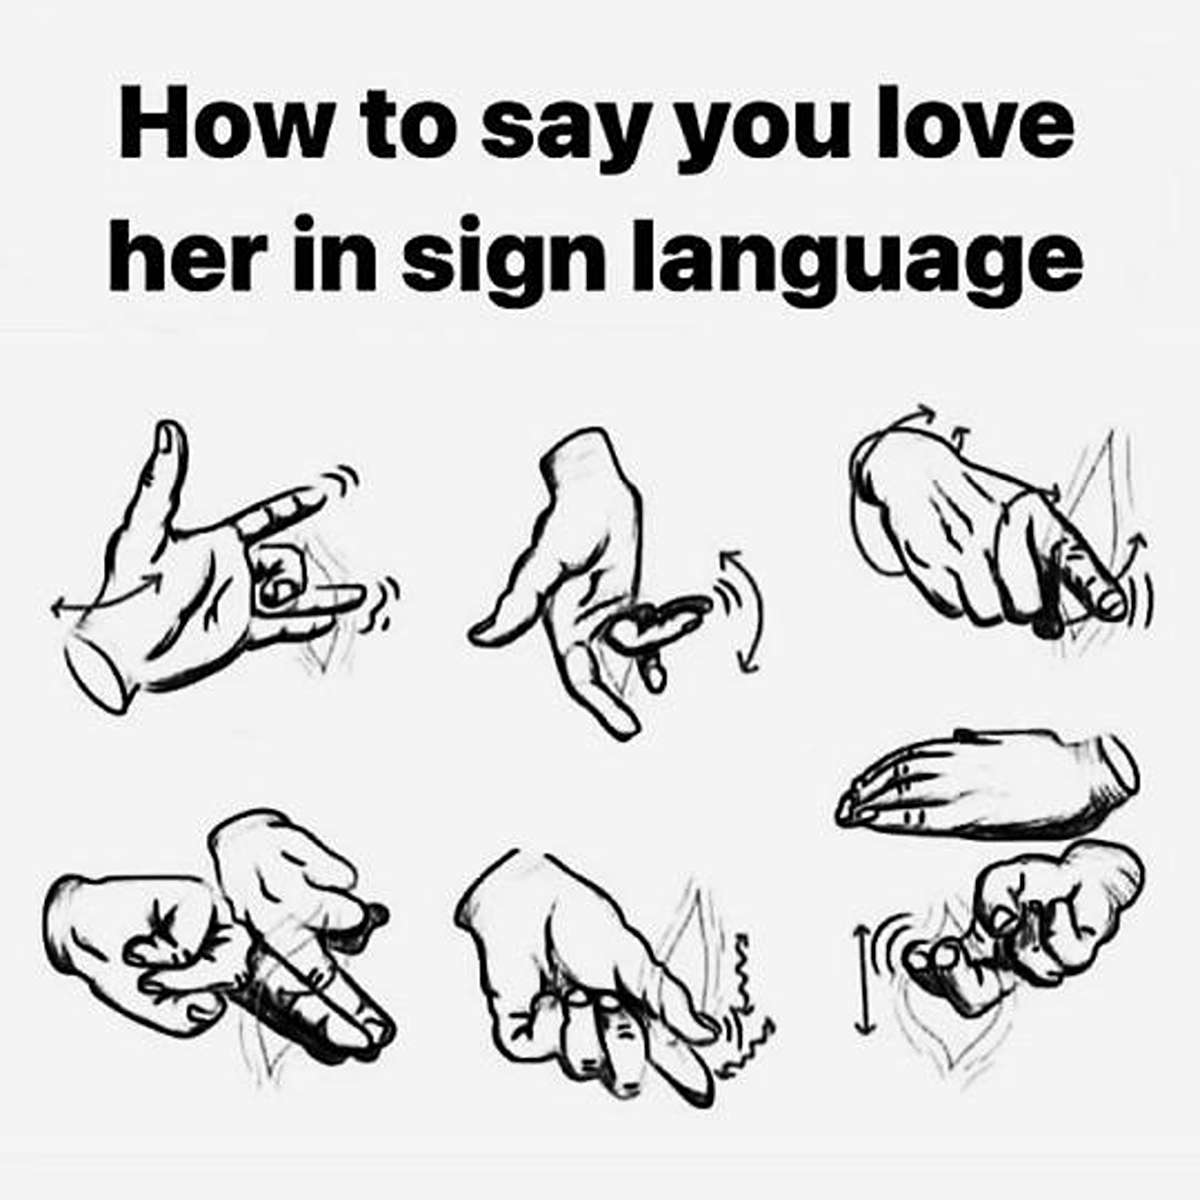 dank memes - say you love her in sign language - How to say you love her in sign language